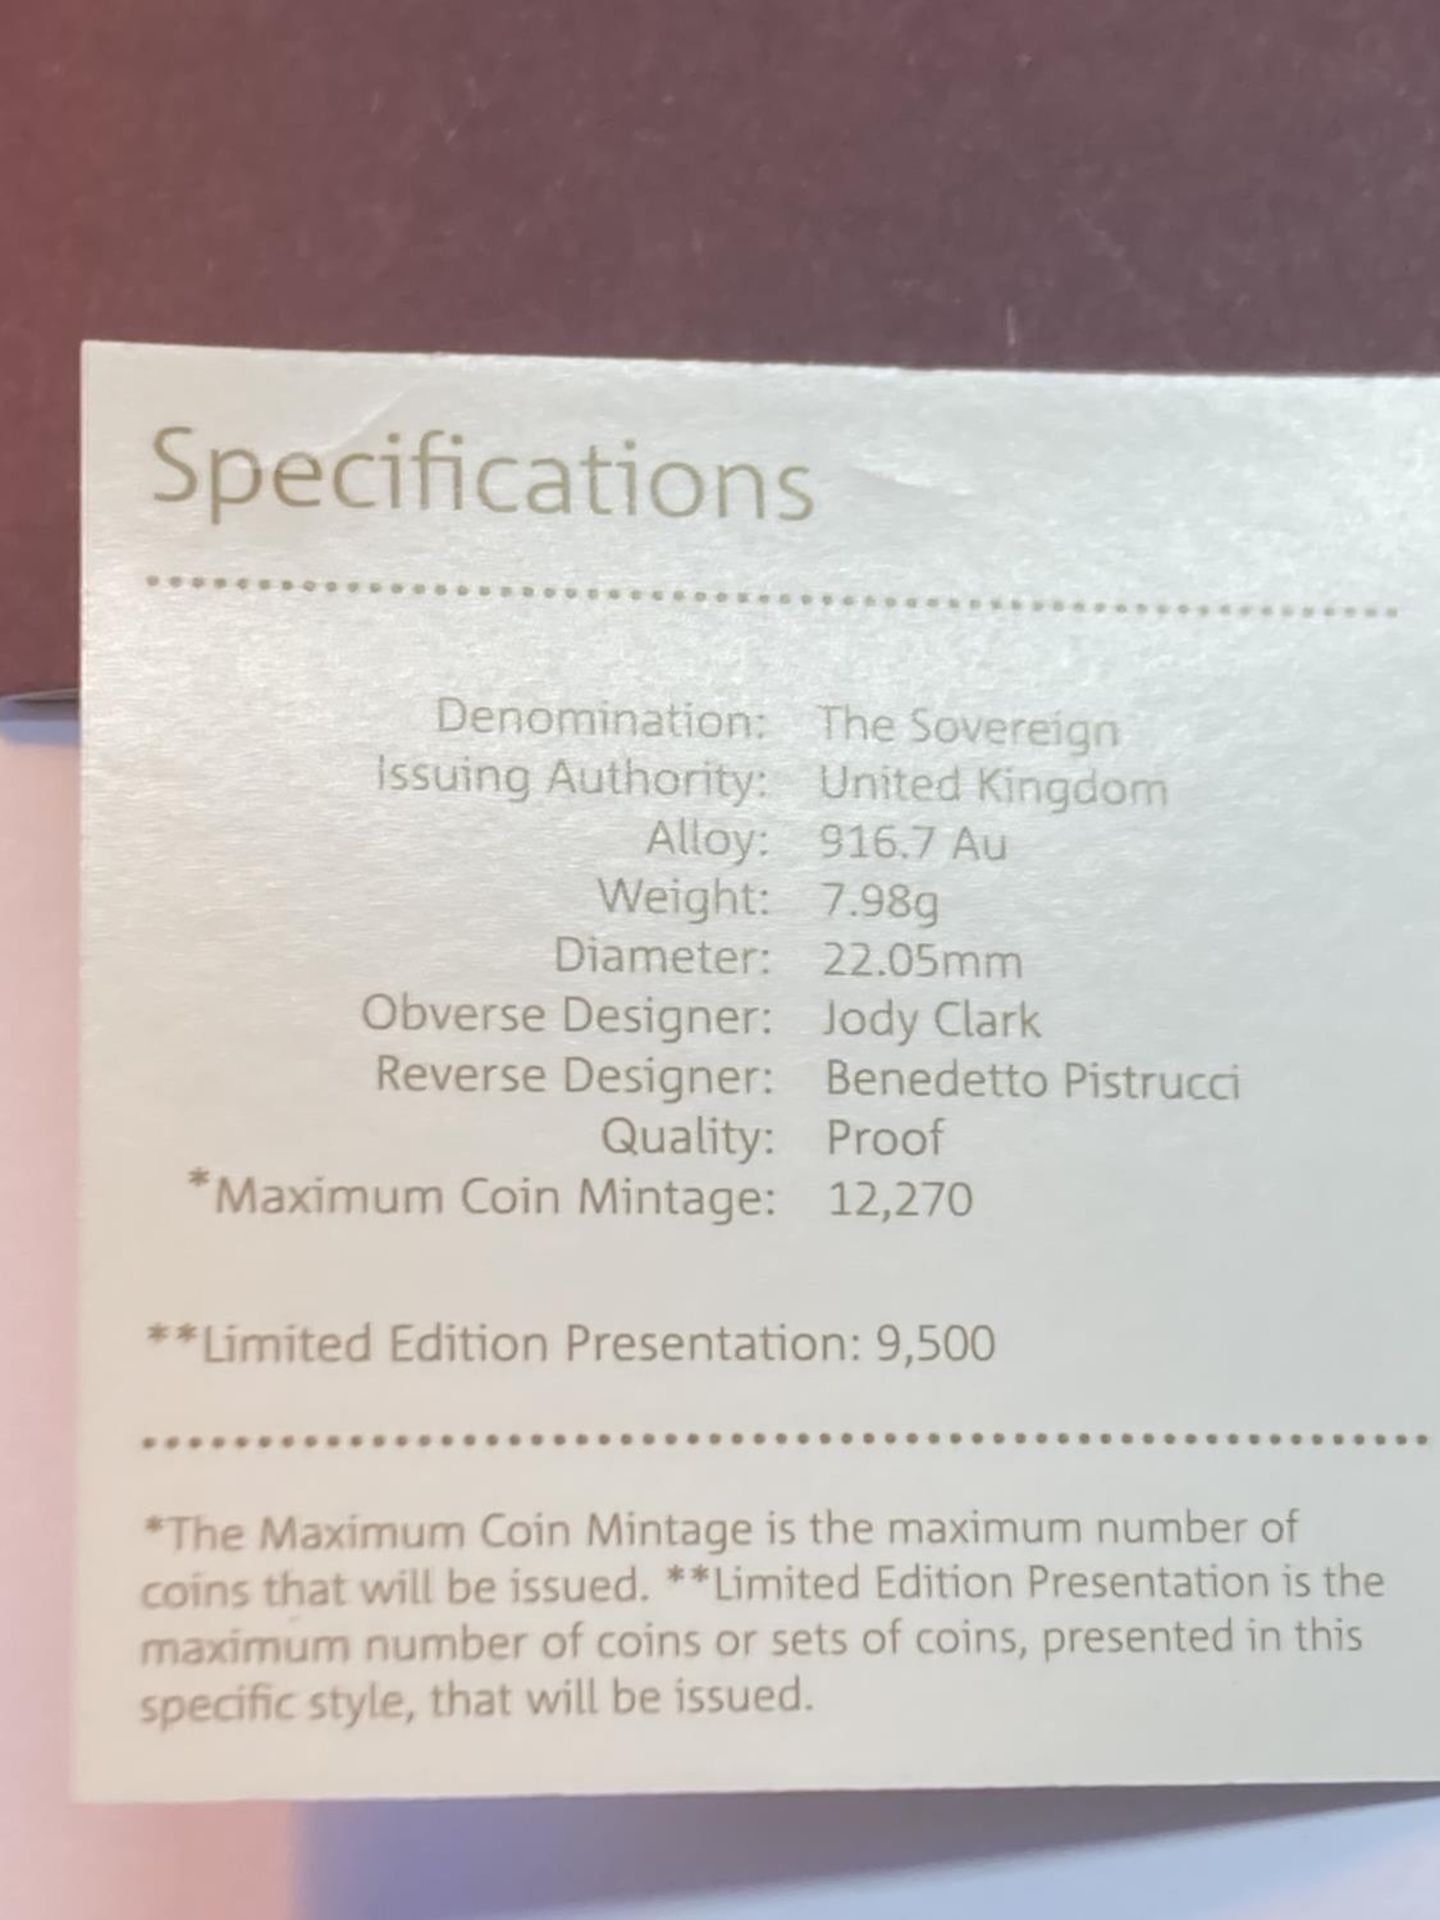 A 2019 THE SOVEREIGN GOLD PROOF LIMITED EDITION NUMBER 6,312 OF 9,500 IN A WOODEN BOXED CASE - Bild 5 aus 5